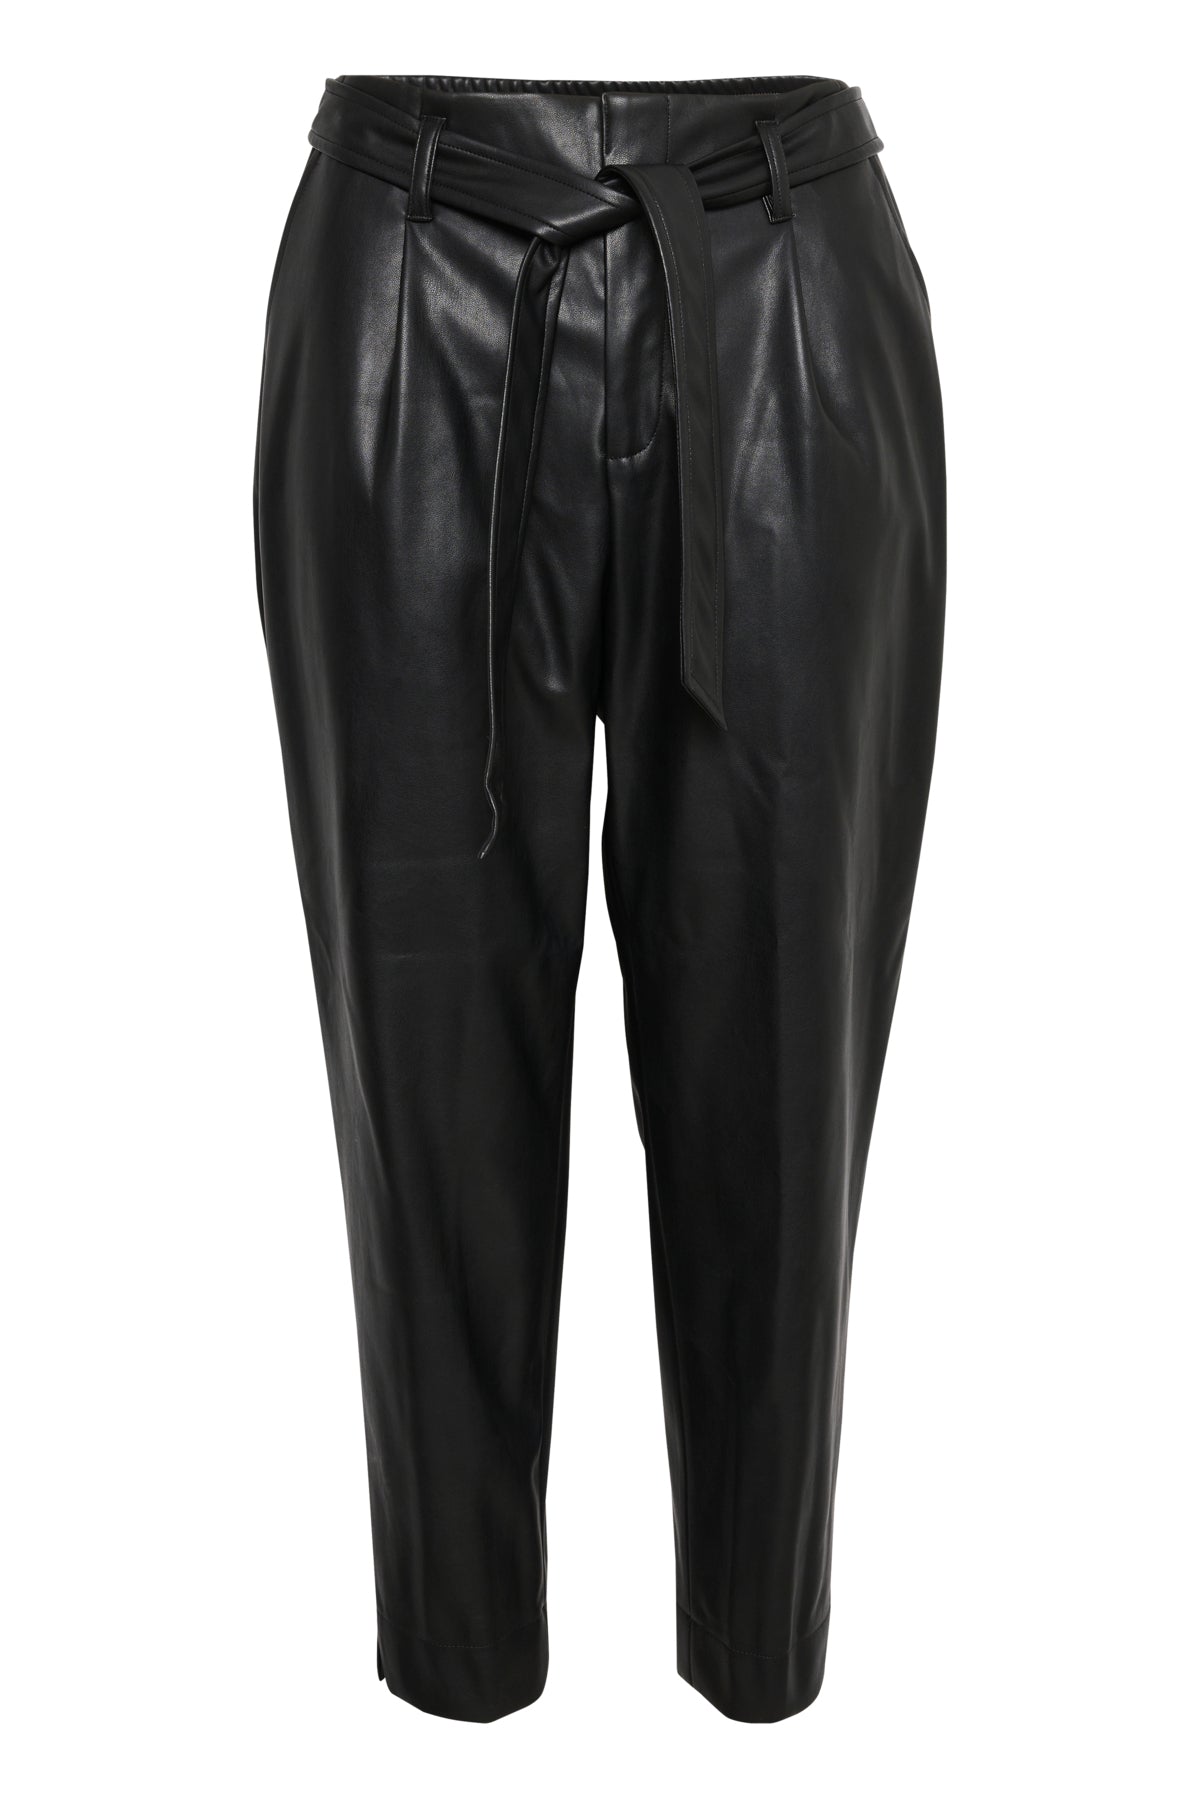 Dowie faux leather trousers with a tapered leg